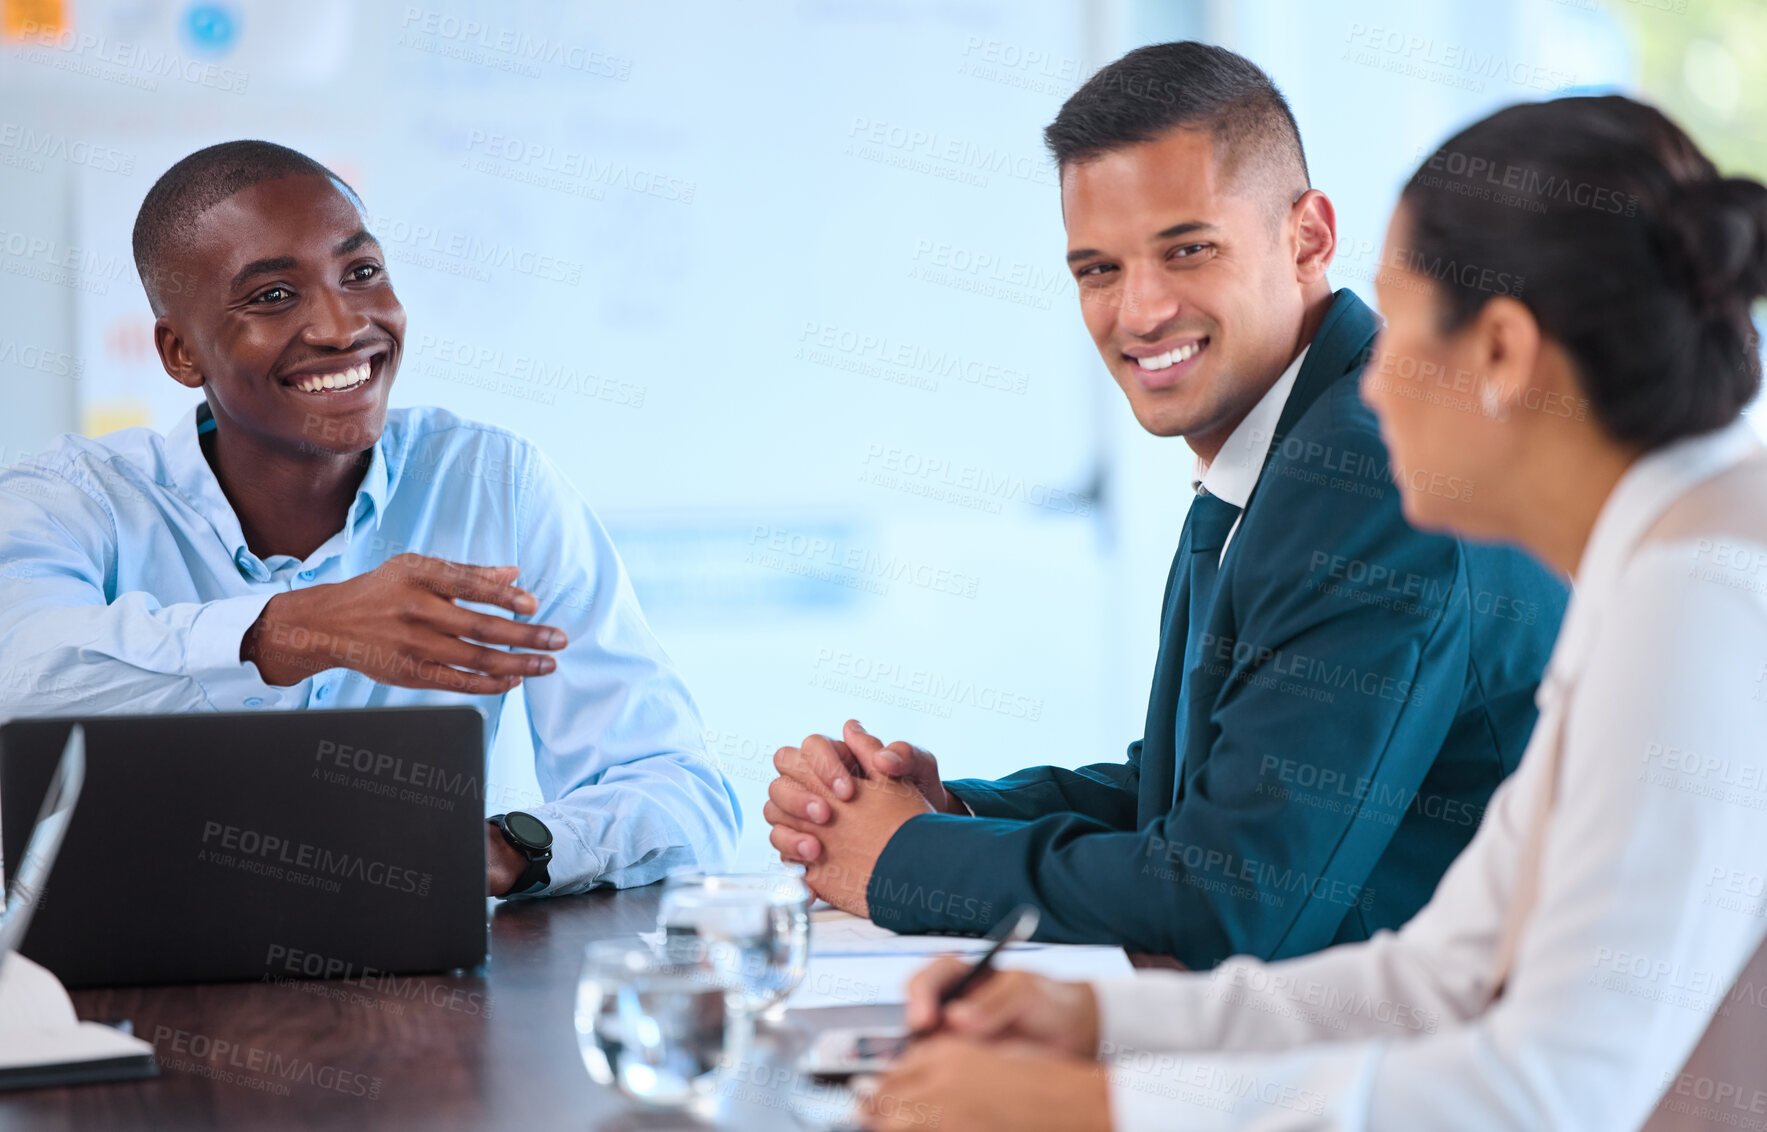 Buy stock photo Teamwork, collaboration and innovation with business, partner in a meeting, discussing strategy for goal or startup. Diverse investors excited to plan and unite on mission or vision, smiling together